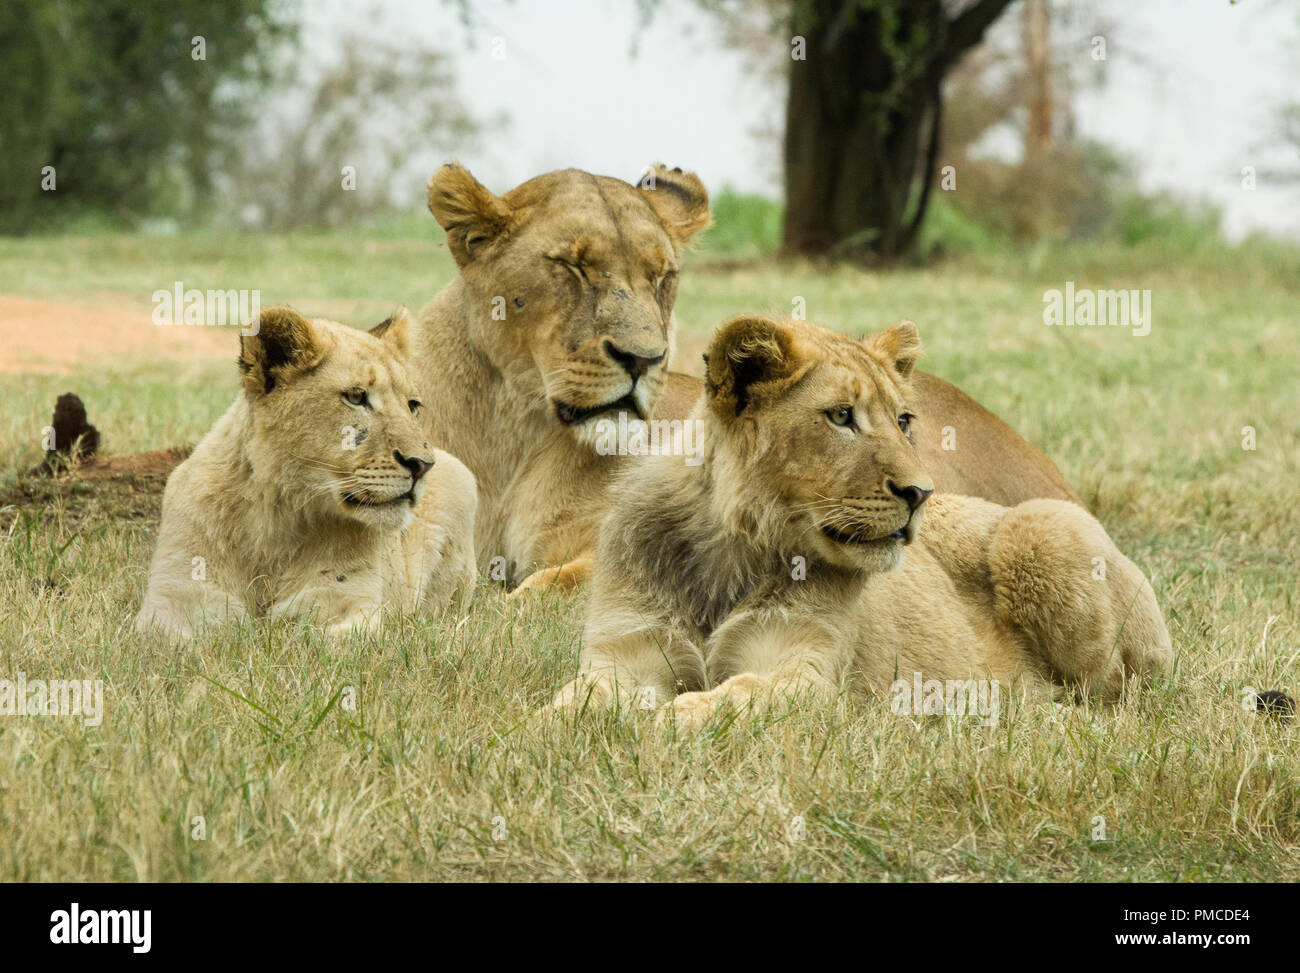 A lioness and two cubs photographed in South Africa Stock Photo